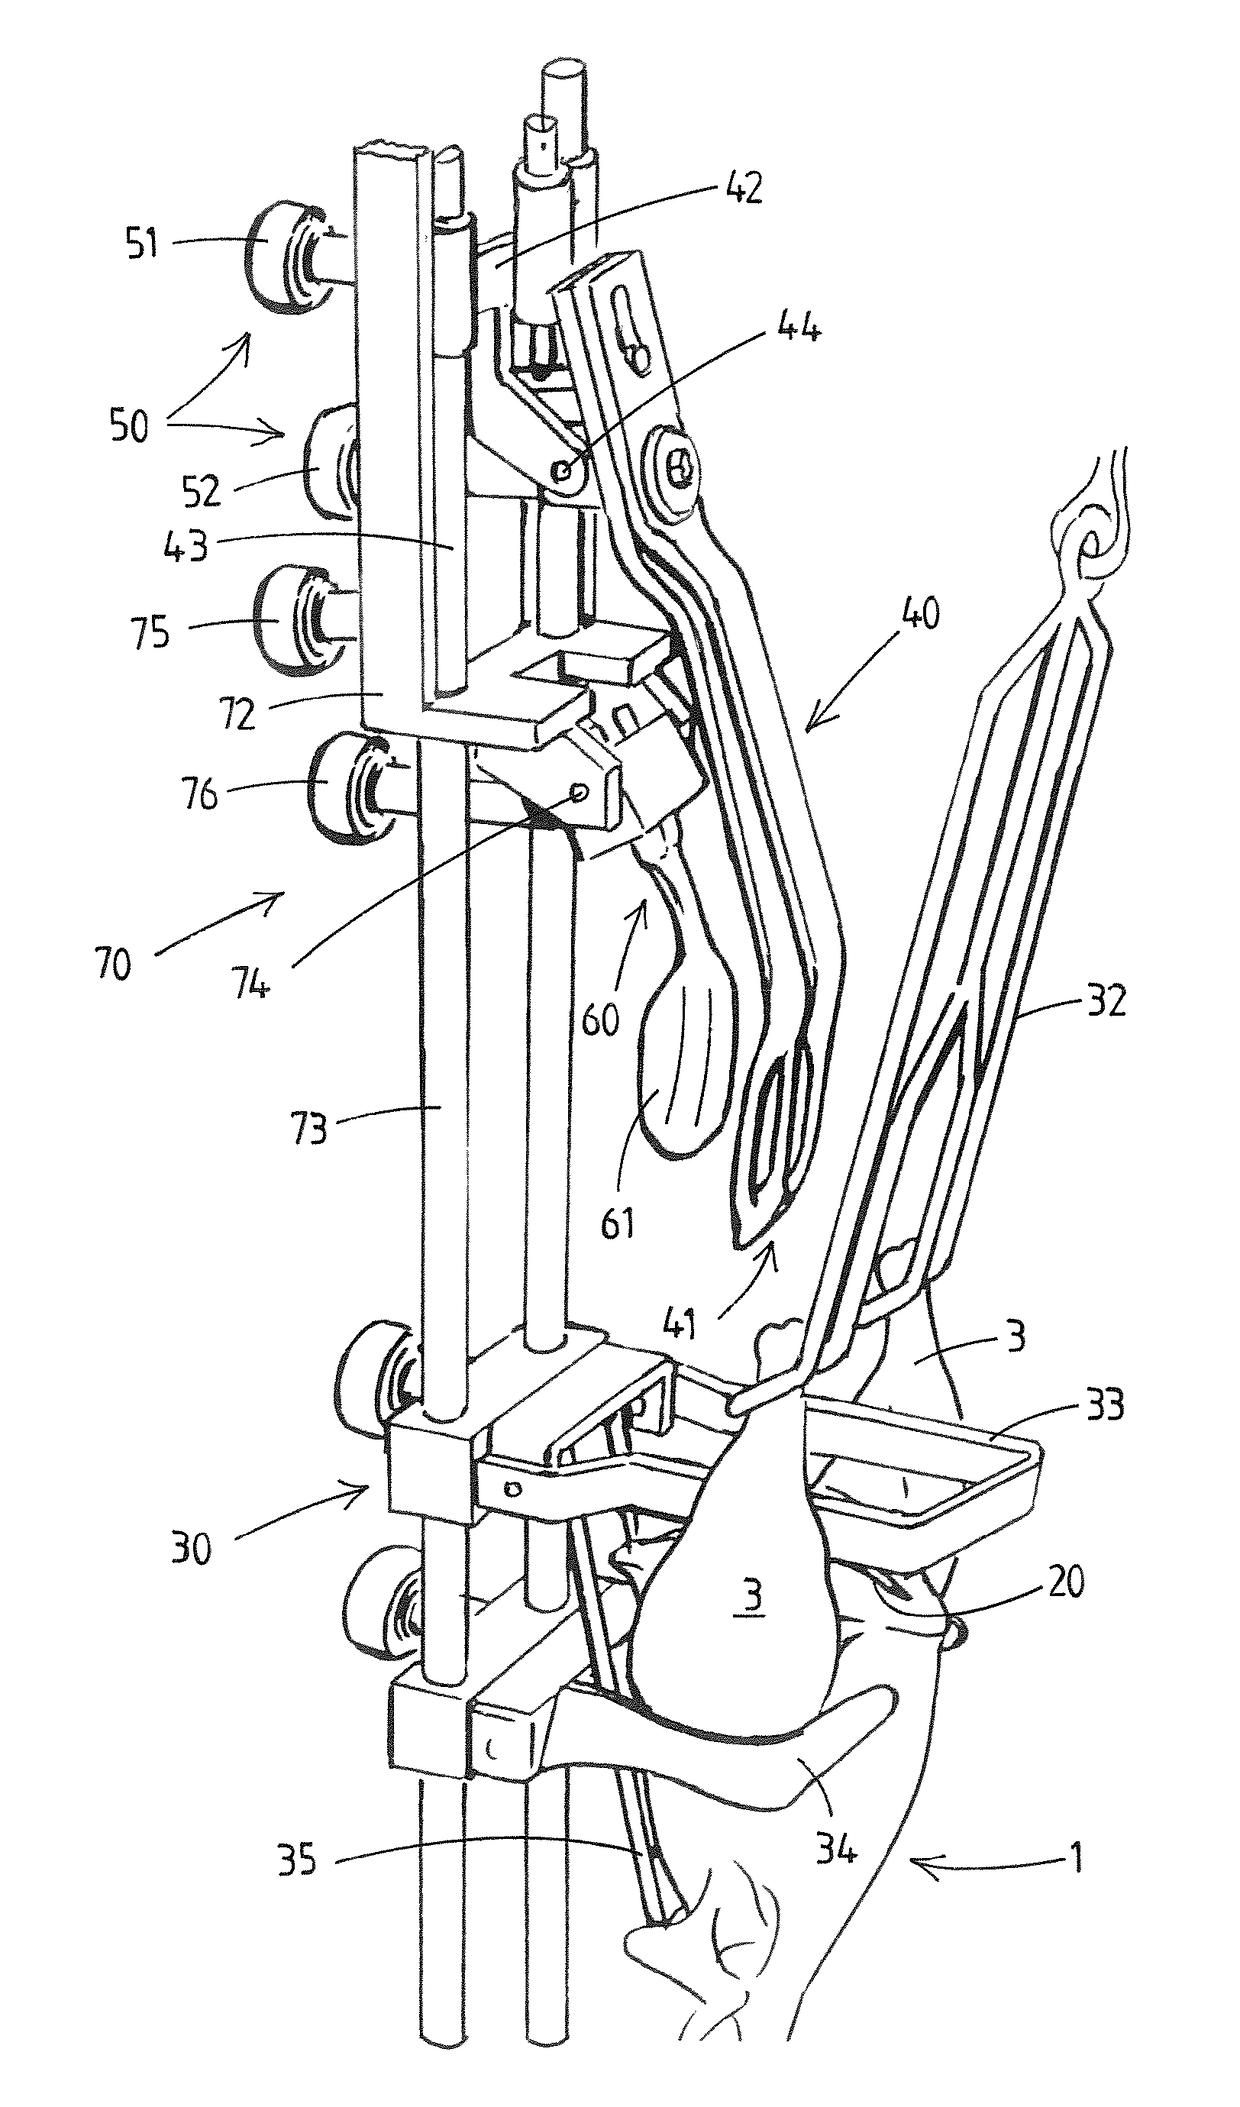 Method and device for evisceration of slaughtered poultry